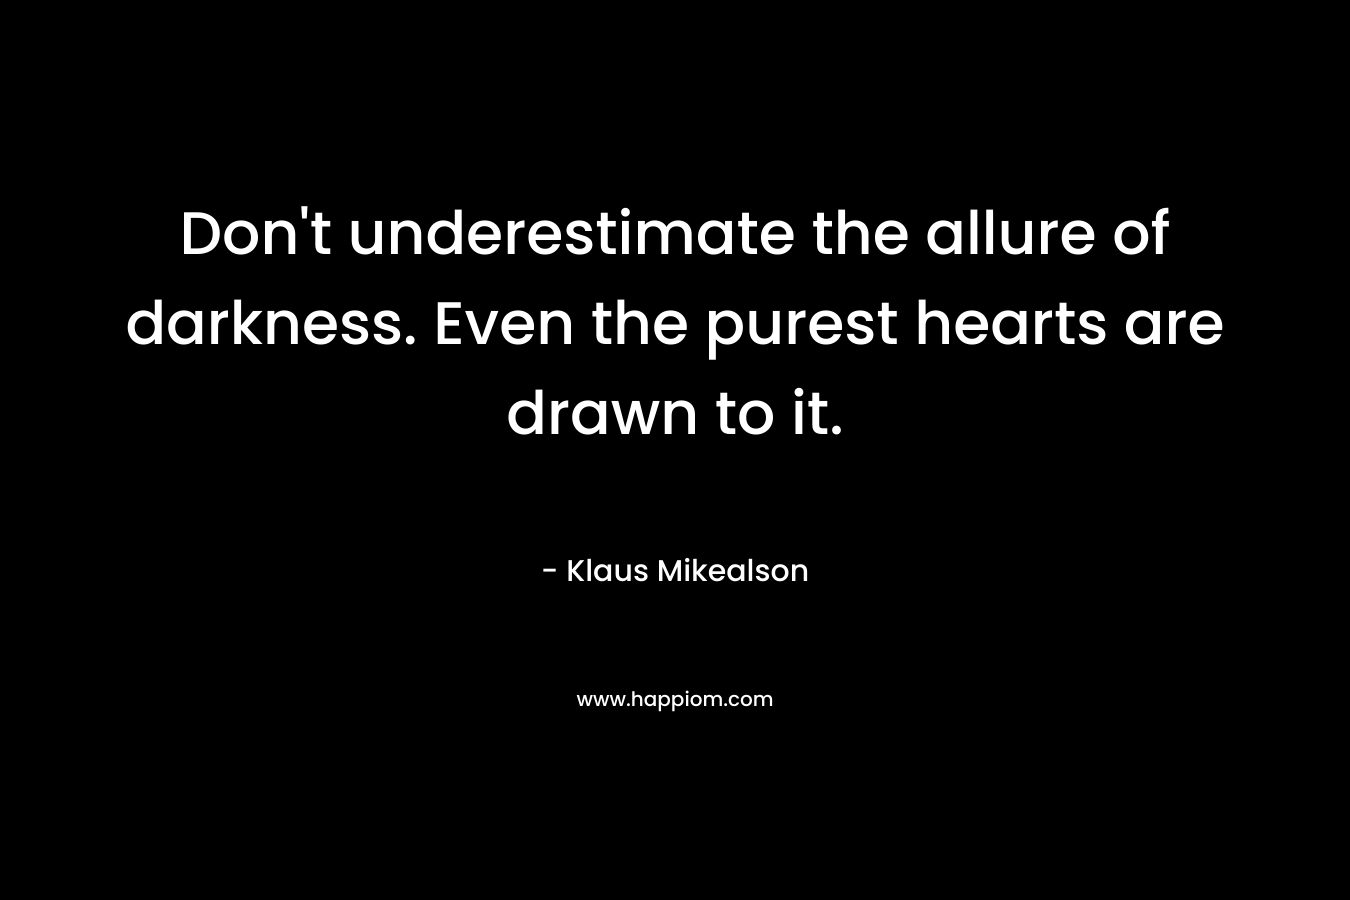 Don’t underestimate the allure of darkness. Even the purest hearts are drawn to it. – Klaus Mikealson